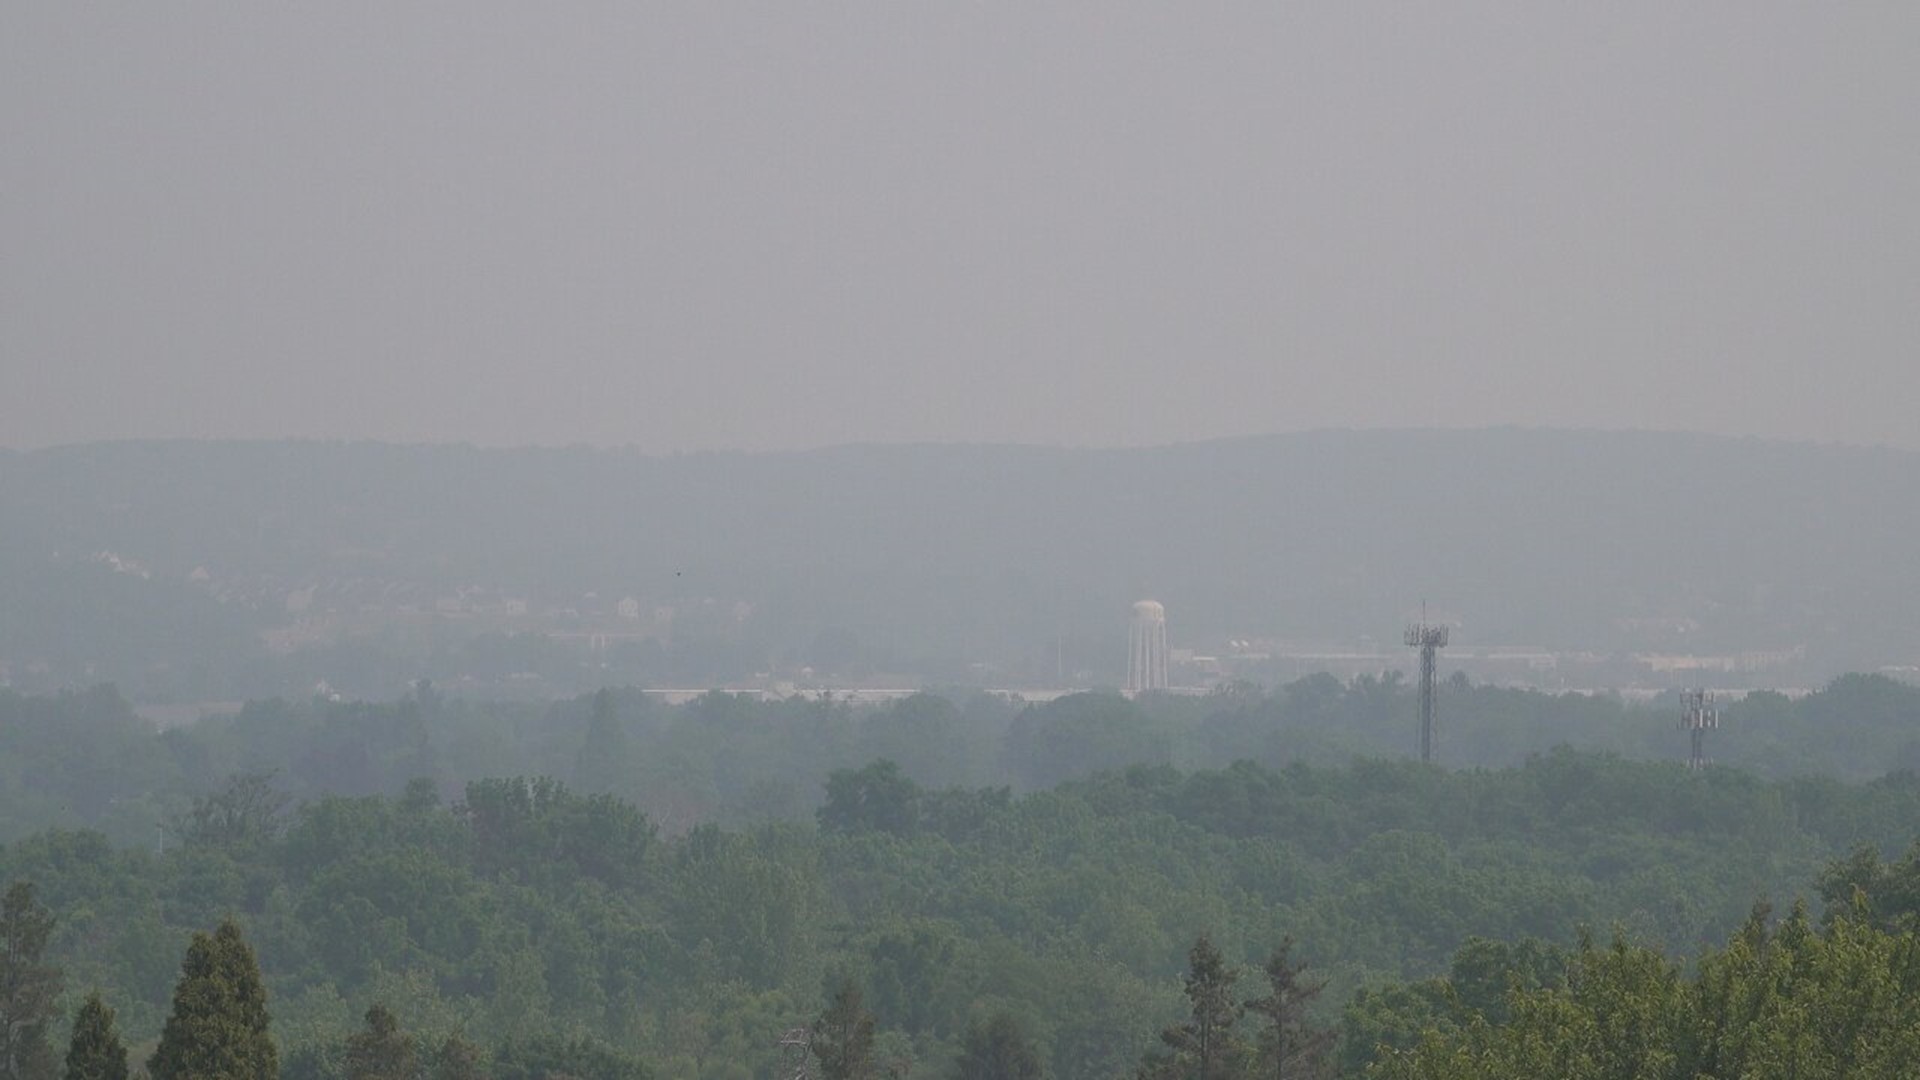 Environmental experts urge Pennsylvanians to stay indoors as air quality reaches unhealthy levels for the general public.